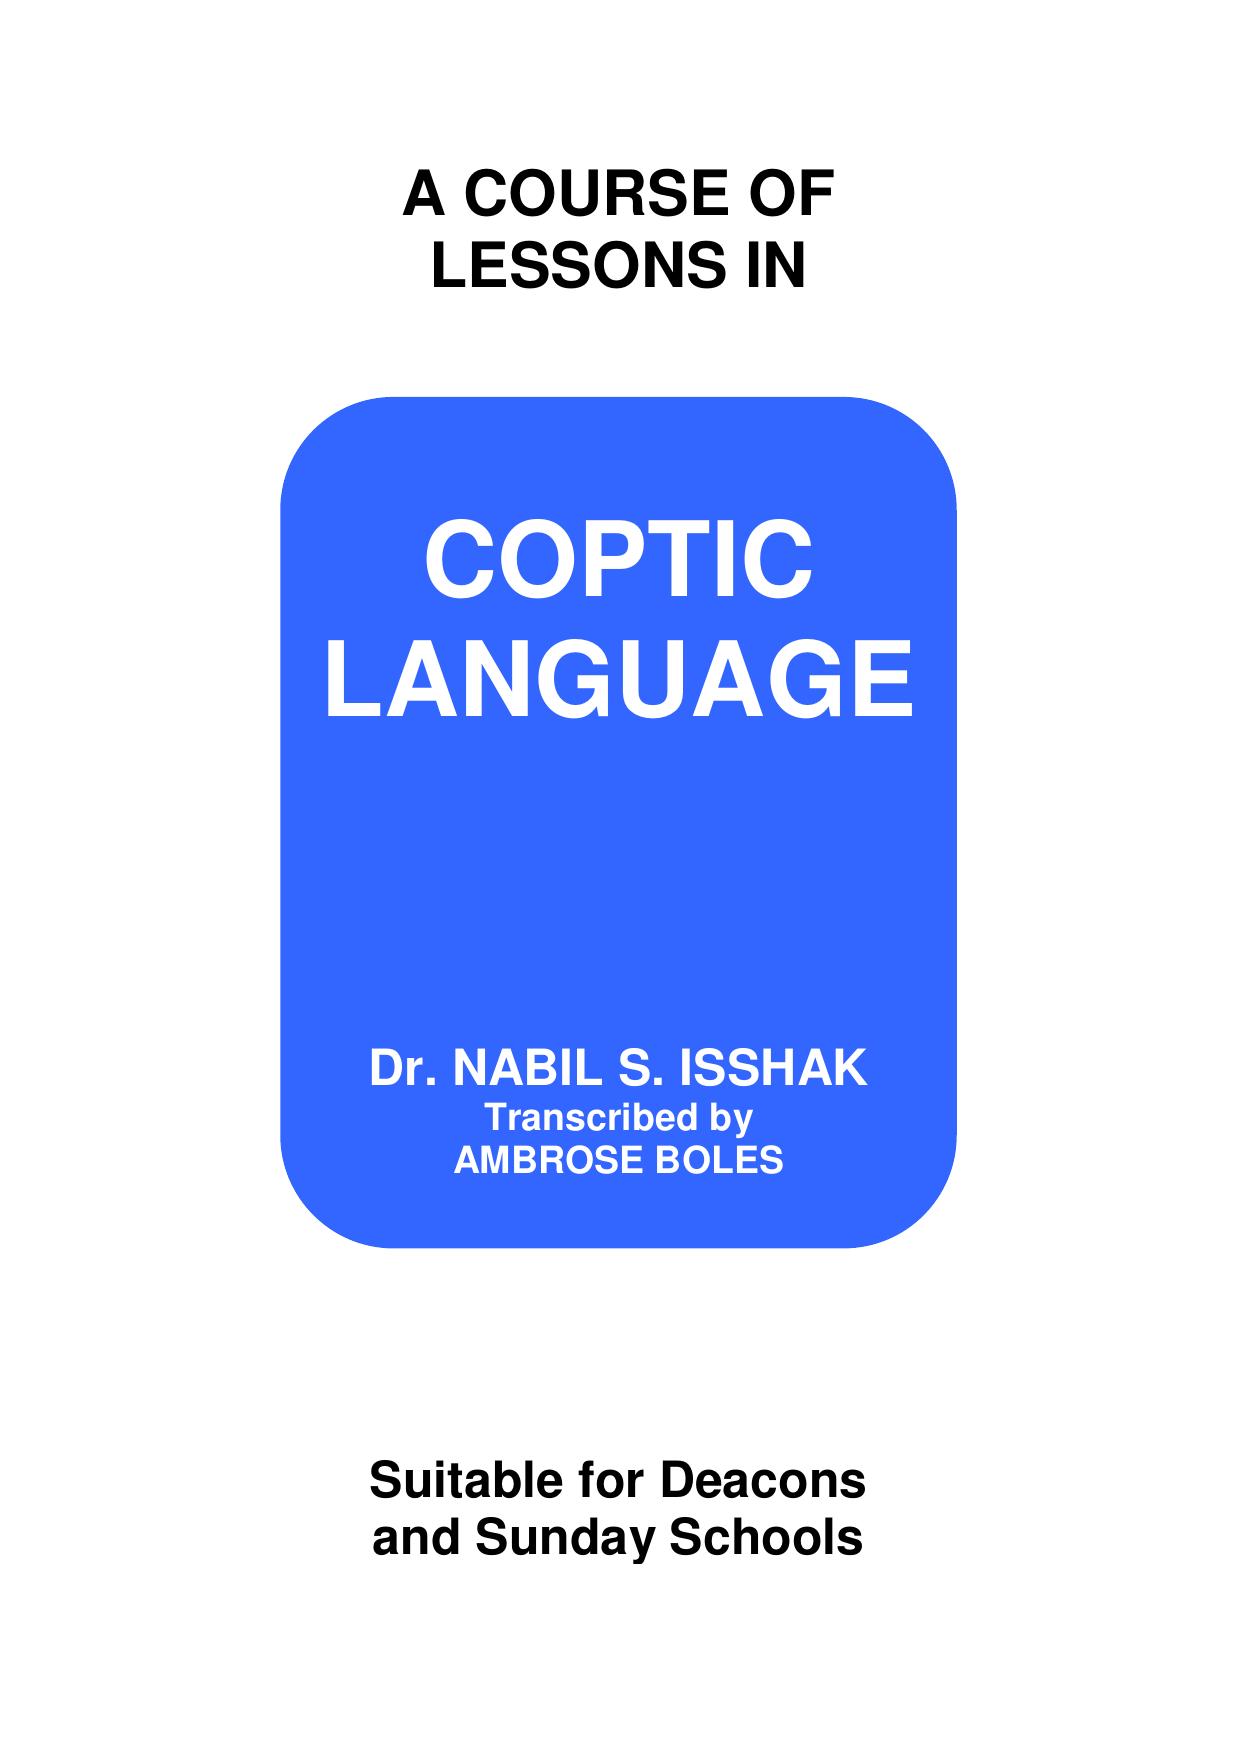 A Course of Lesson in: Coptic Language